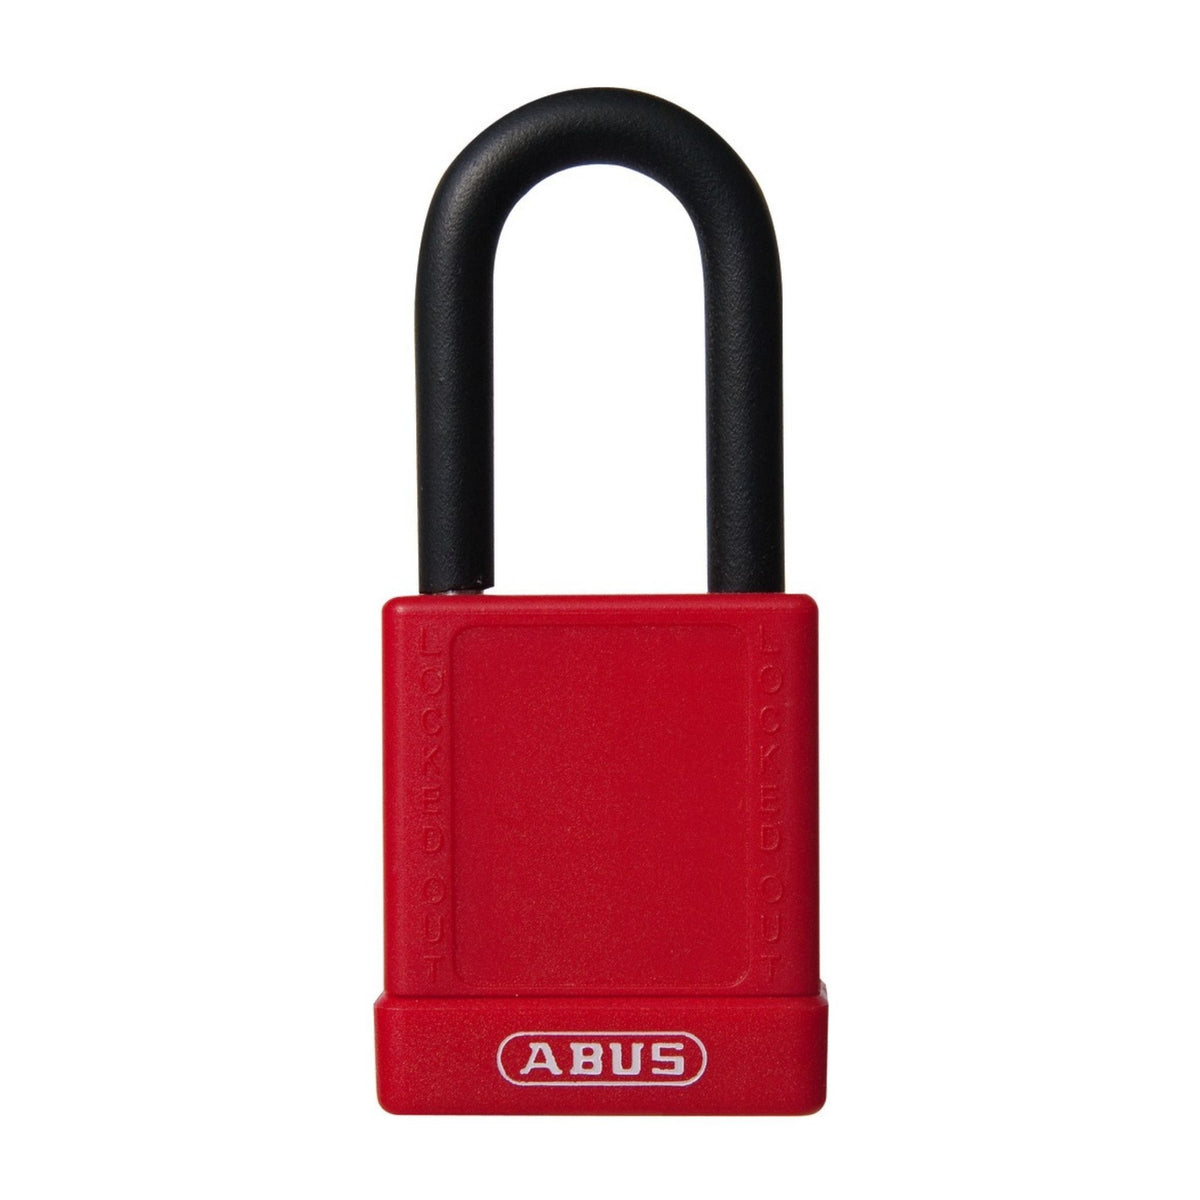 Abus 74/40 KD Keyed Different Red Insulated Safety Padlock - The Lock Source